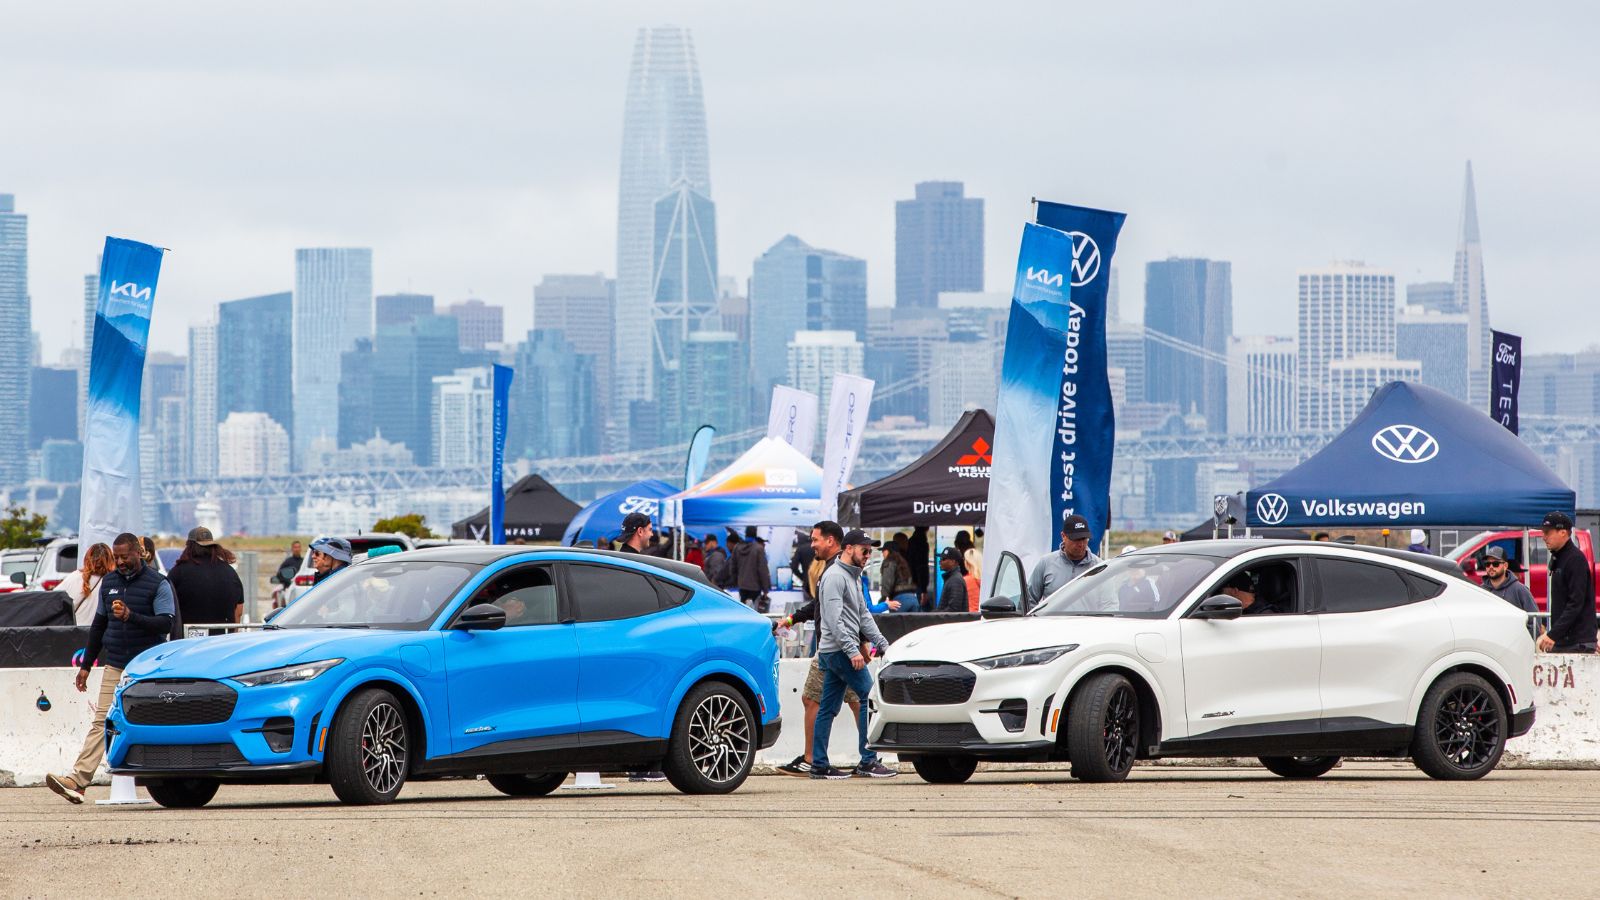 Electric vehicles are on display at an Electrify Expo festival...